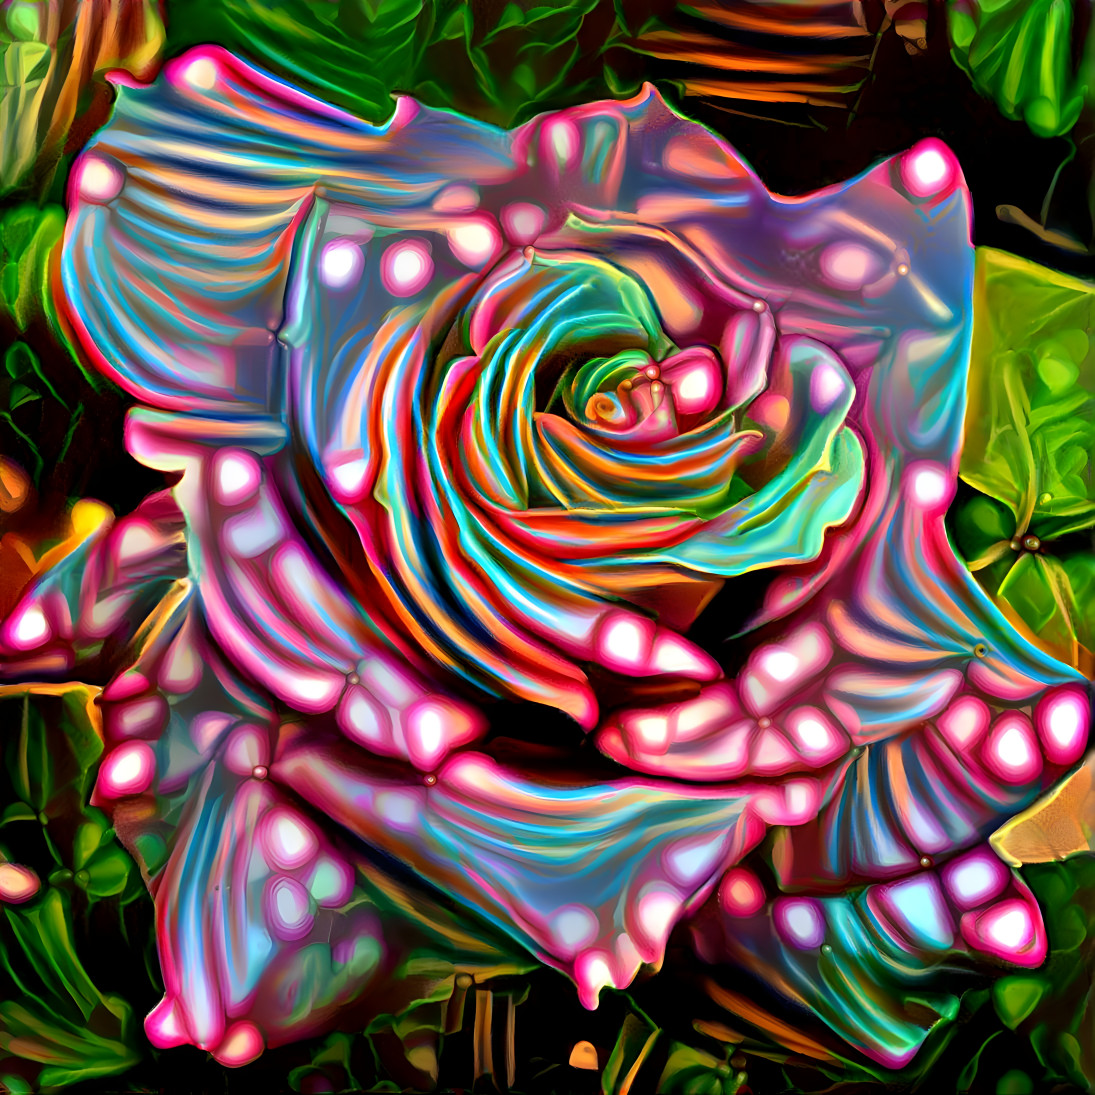 Funkified rose